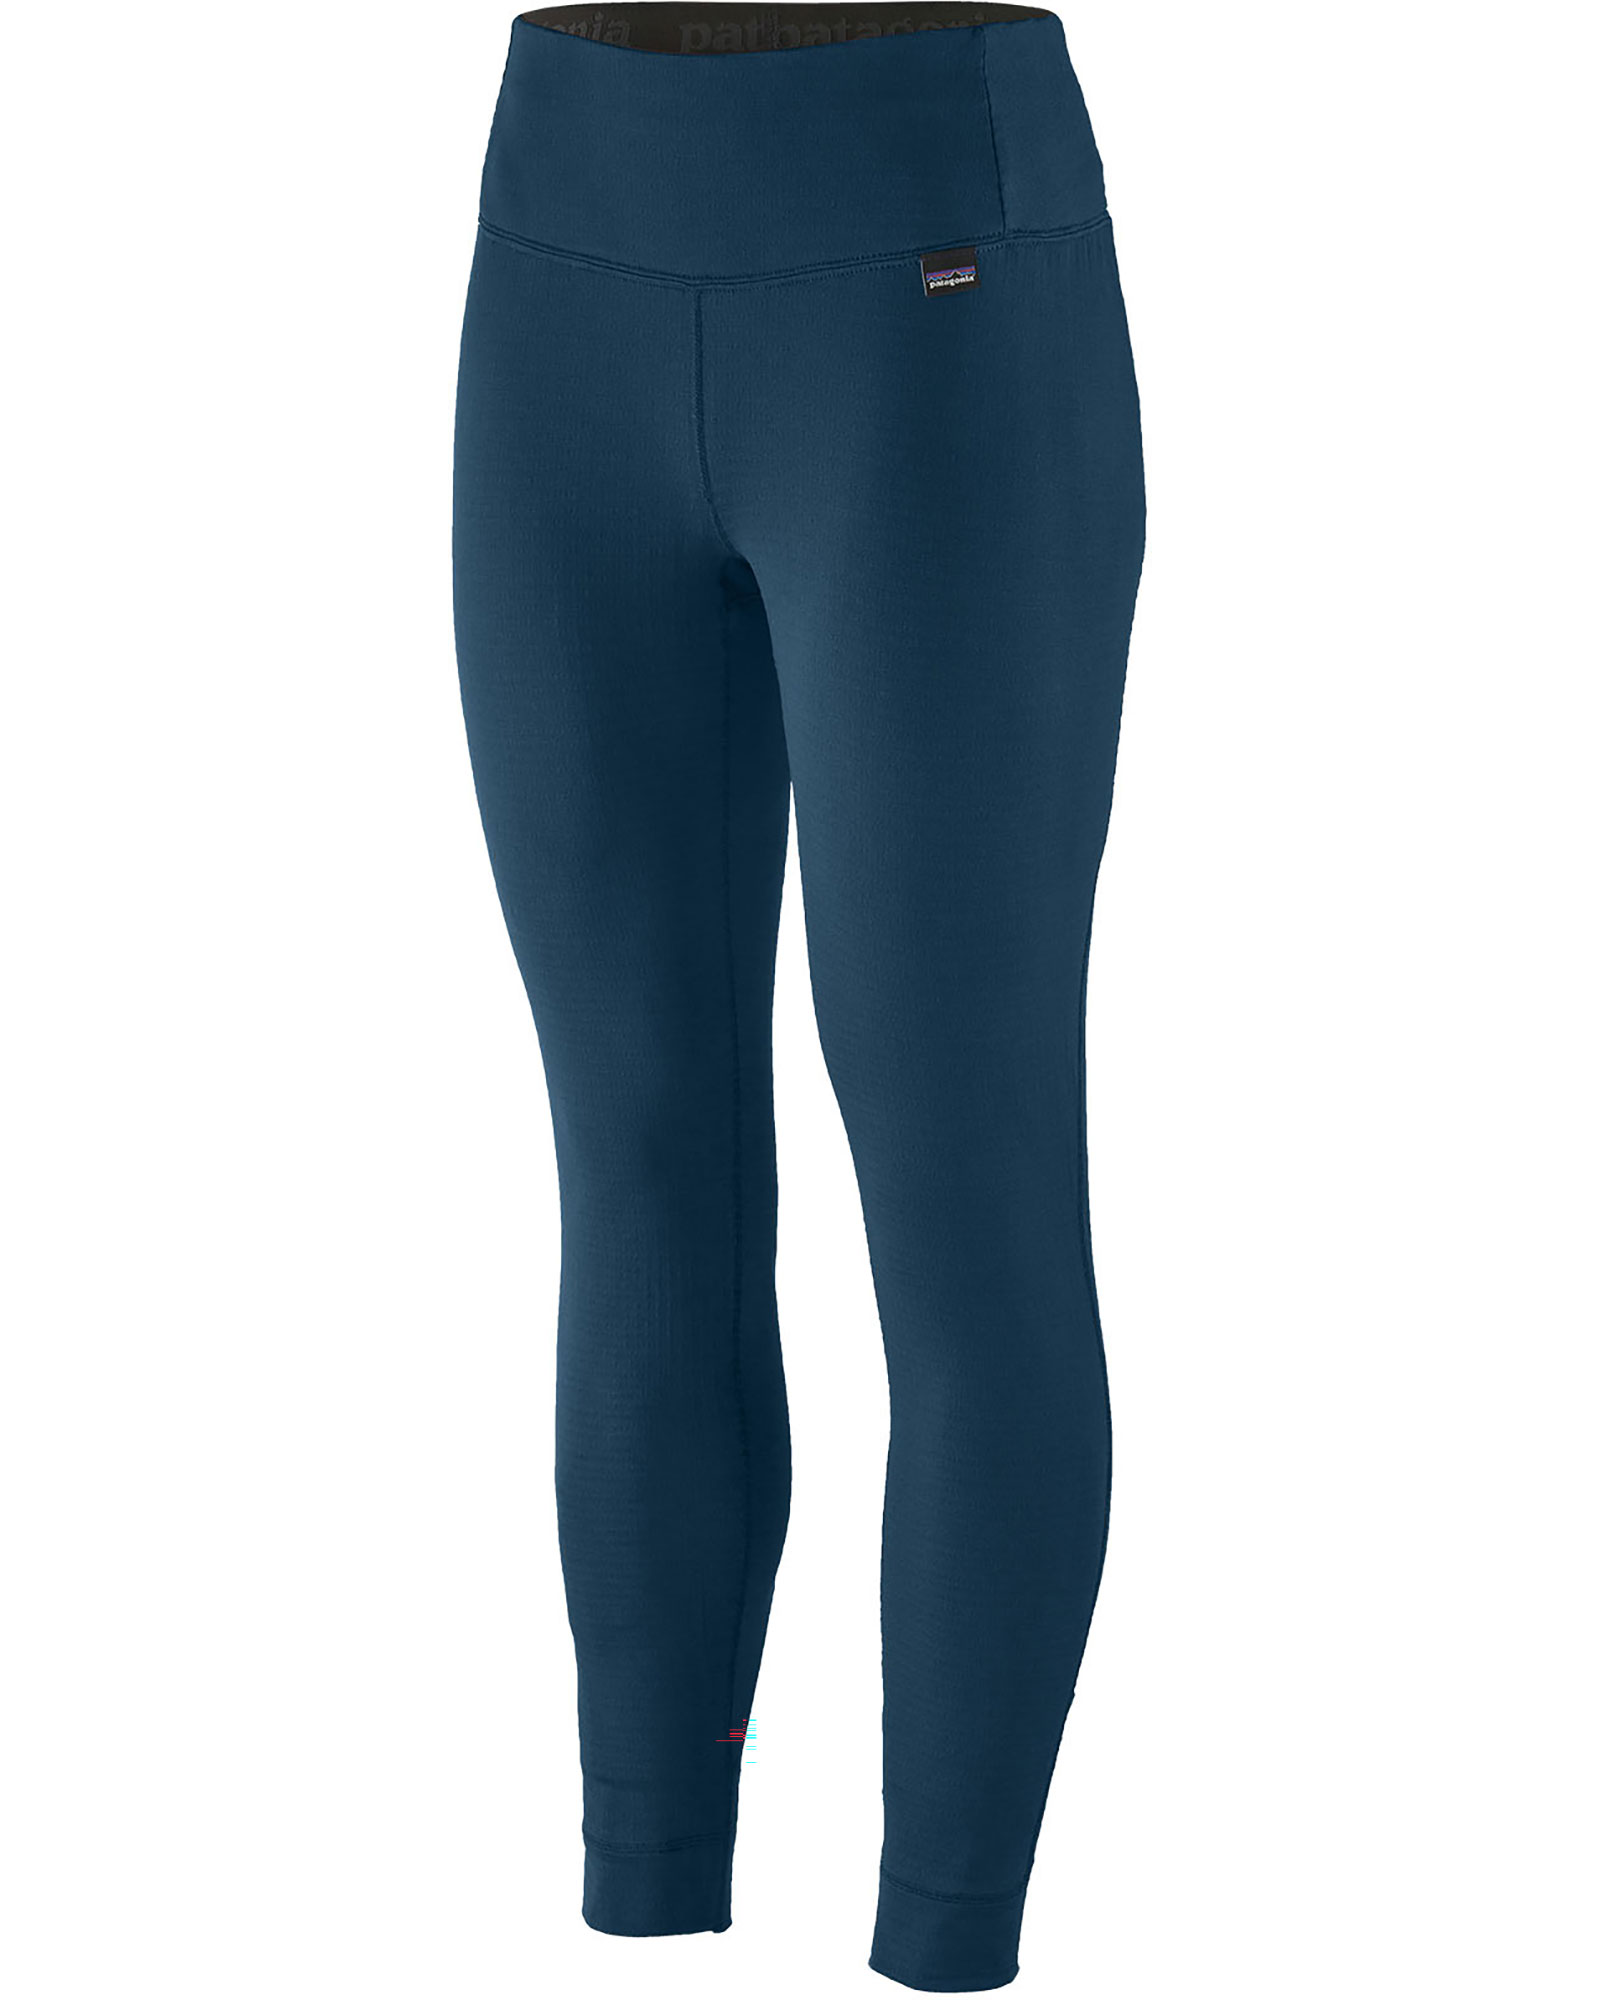 Patagonia Capilene Women’s Thermal Weight Tights - Lagoon Blue XS